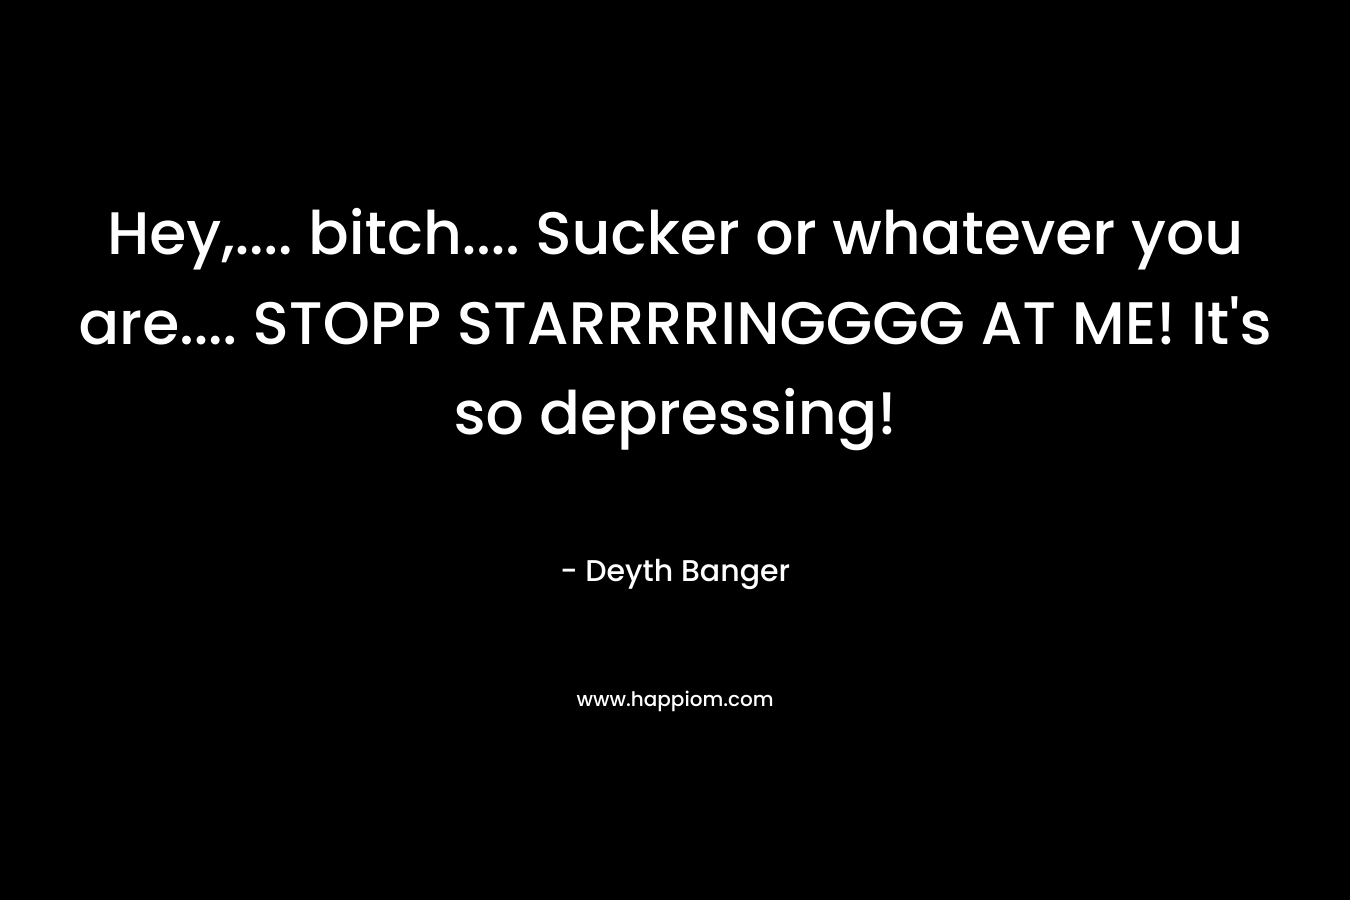 Hey,…. bitch…. Sucker or whatever you are…. STOPP STARRRRINGGGG AT ME! It’s so depressing! – Deyth Banger